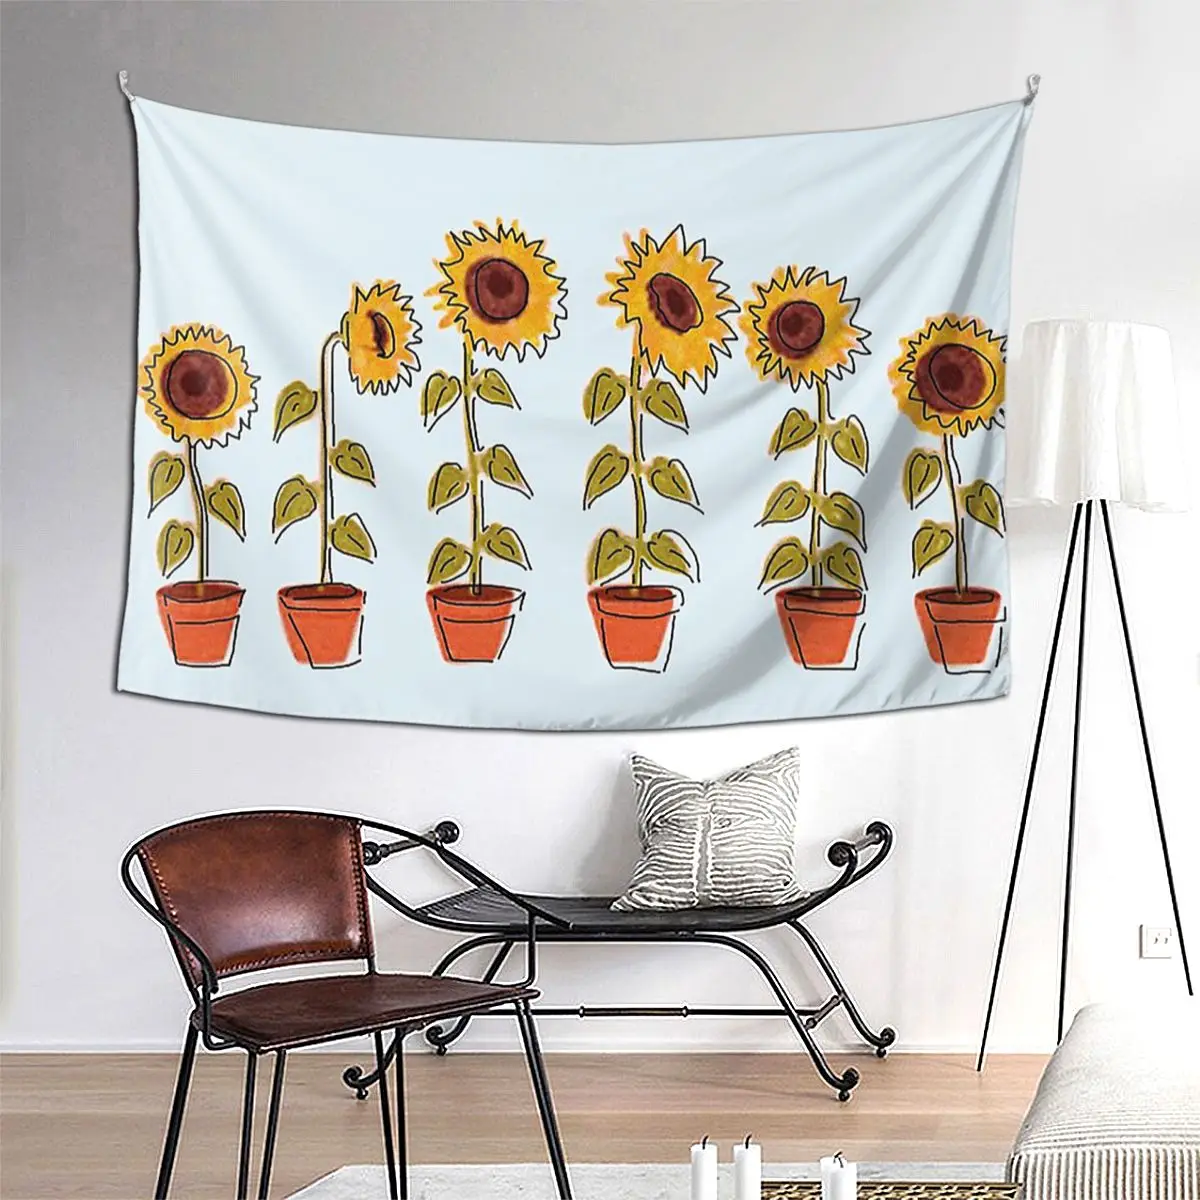 

Sunflowers Tapestry Funny Wall Hanging Aesthetic Home Decor Tapestries for Living Room Bedroom Dorm Room